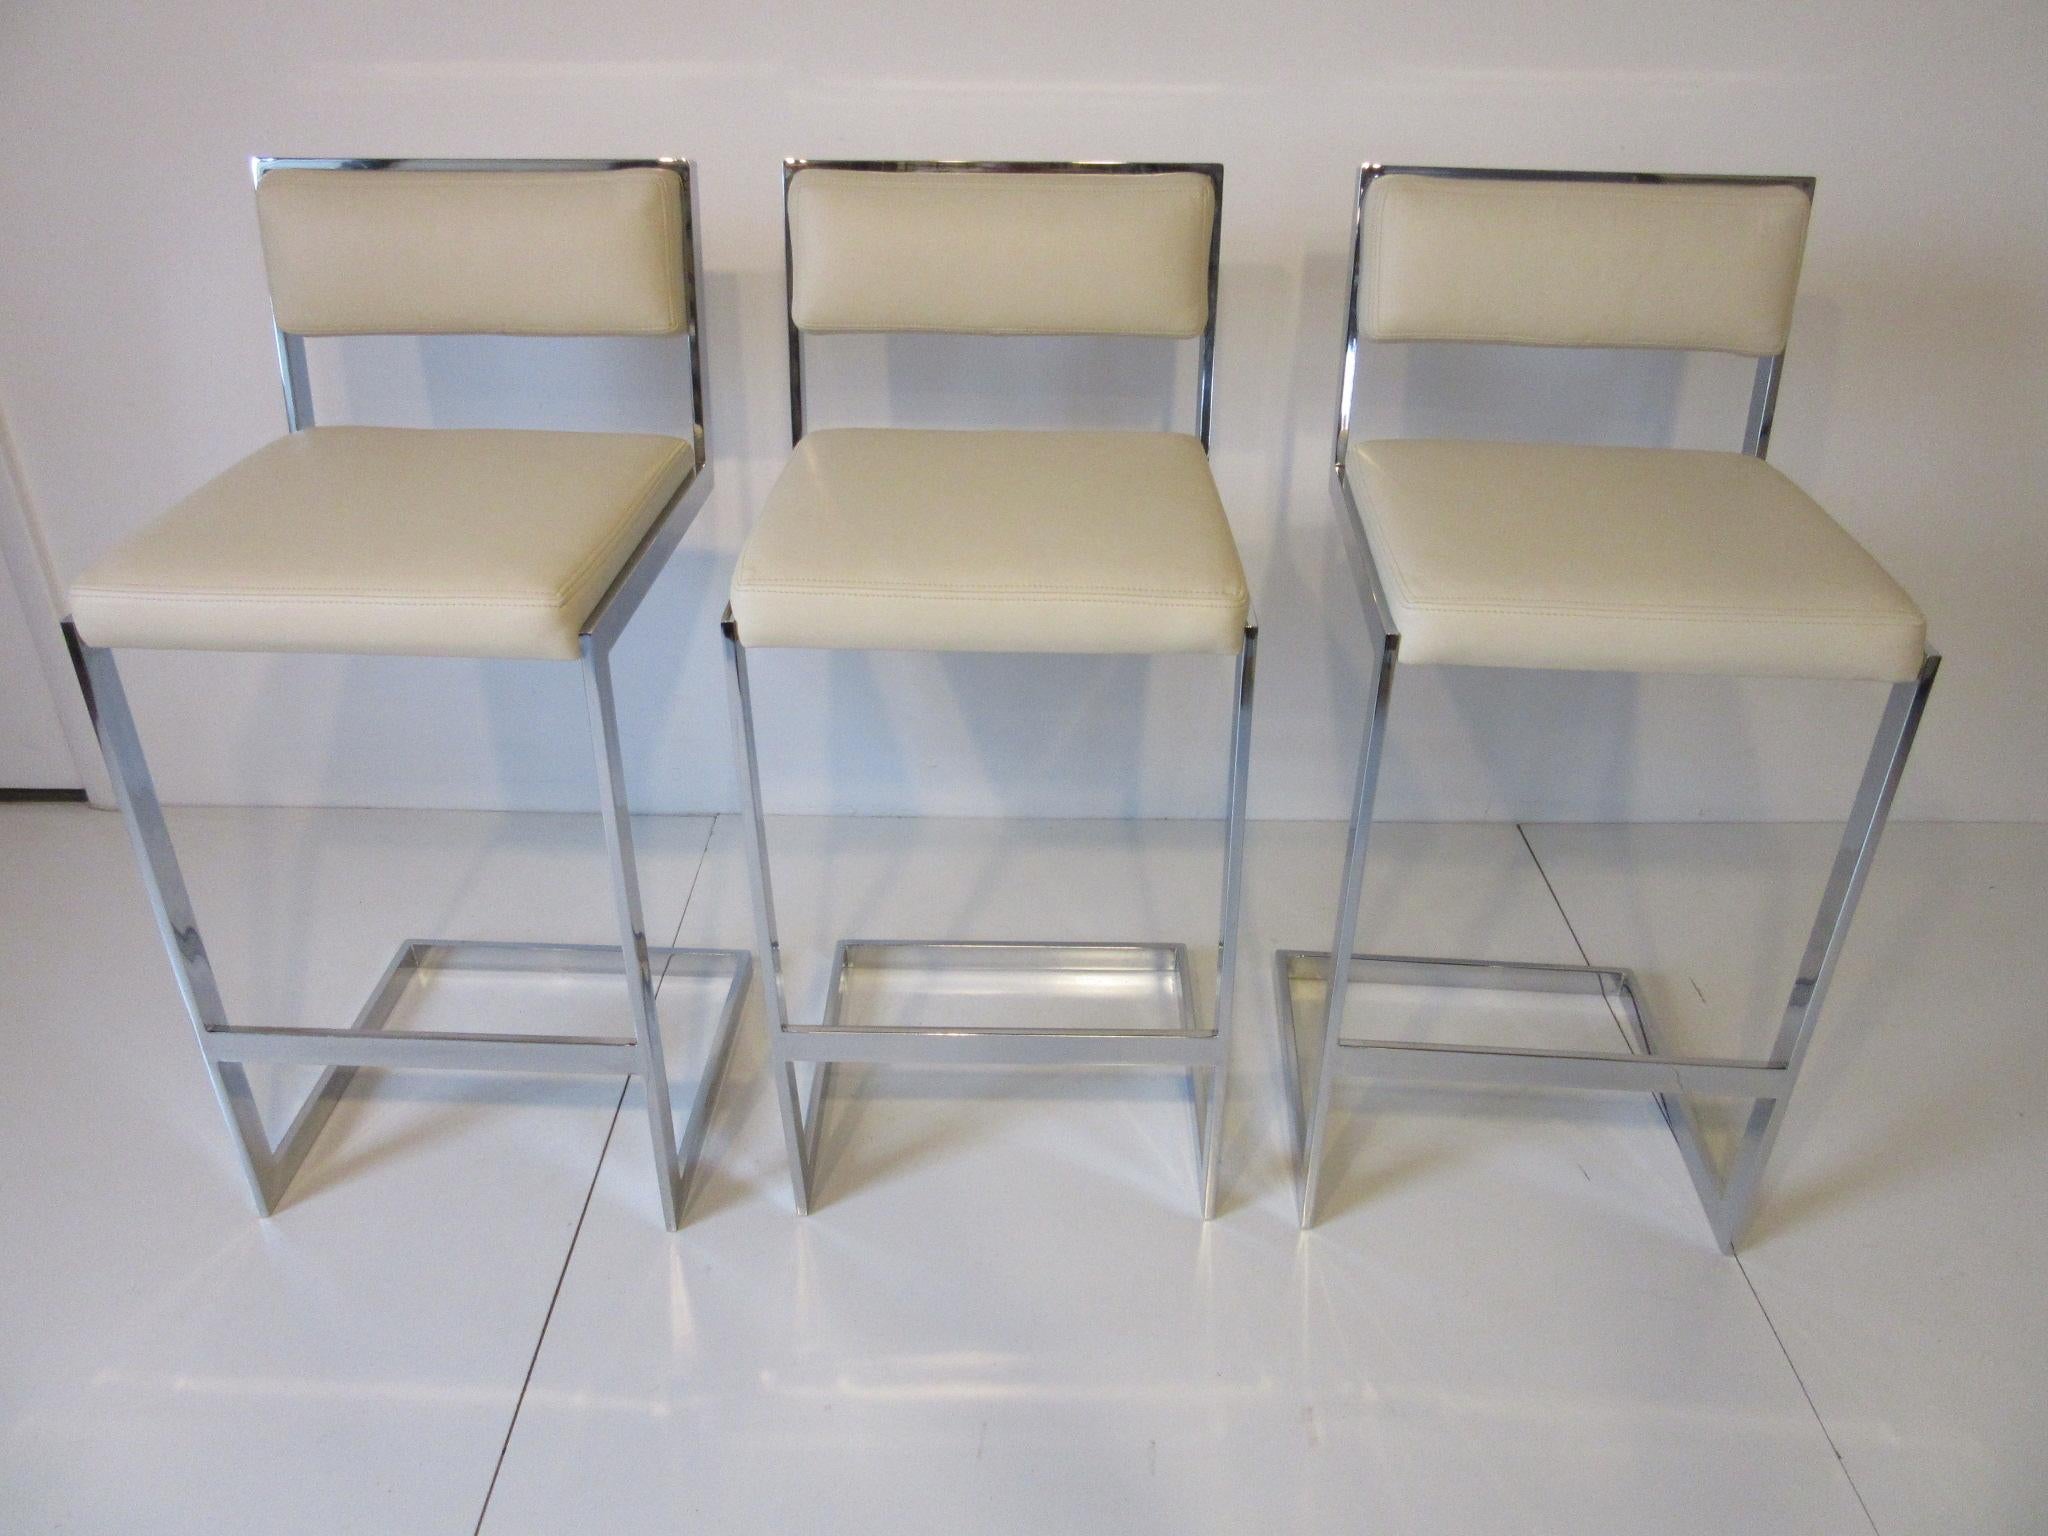 A set of three chrome bar stools reupholstered in a cream colored soft and rich leather with French double stitched seams. Manufactured by the Thayer Coggin furniture company.